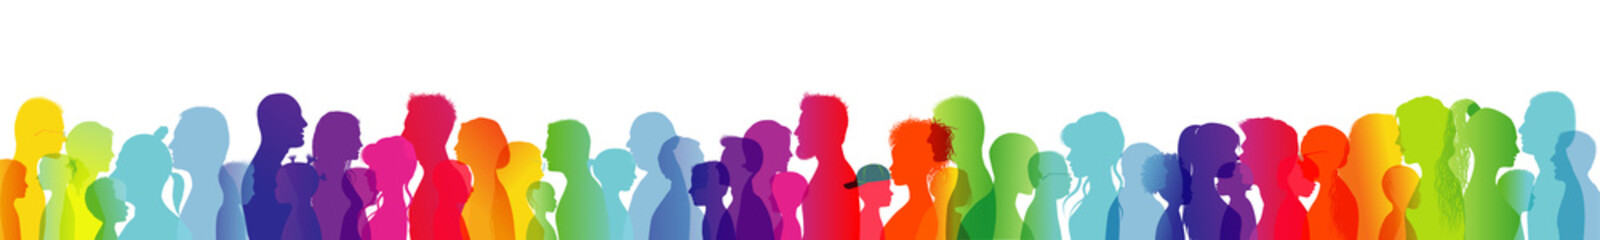 Dialogue between people of different ages and ethnic groups. Crowd talking. Rainbow colored profile silhouette. Many different people talking. Diversity between people. Multiple exposure